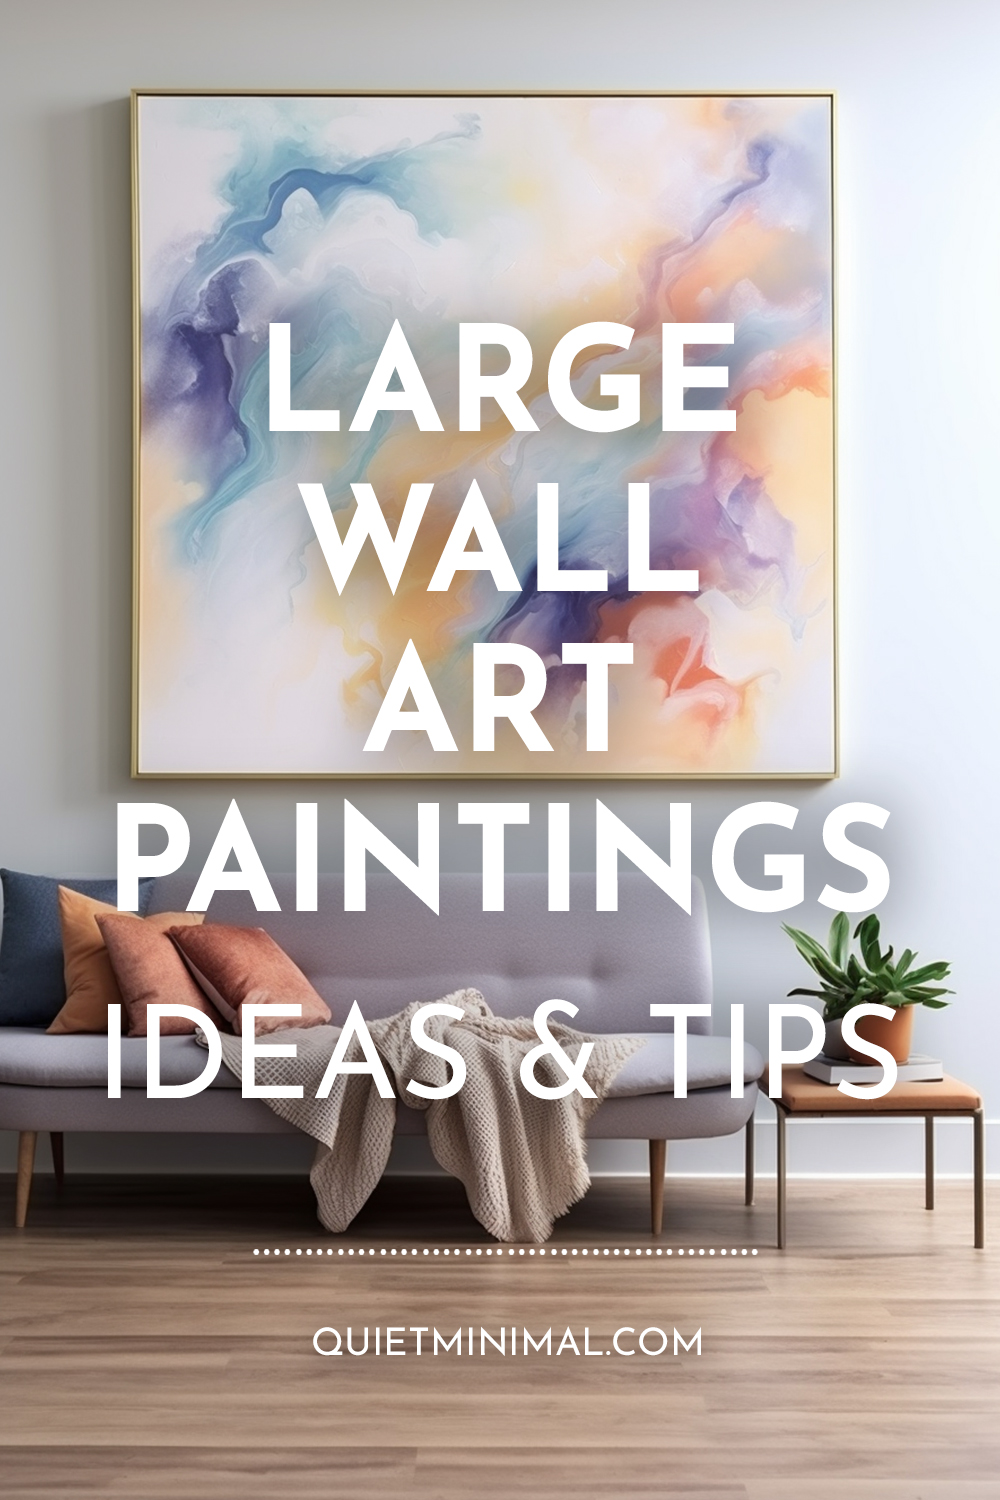 Large wall art painting ideas for modern interior design.